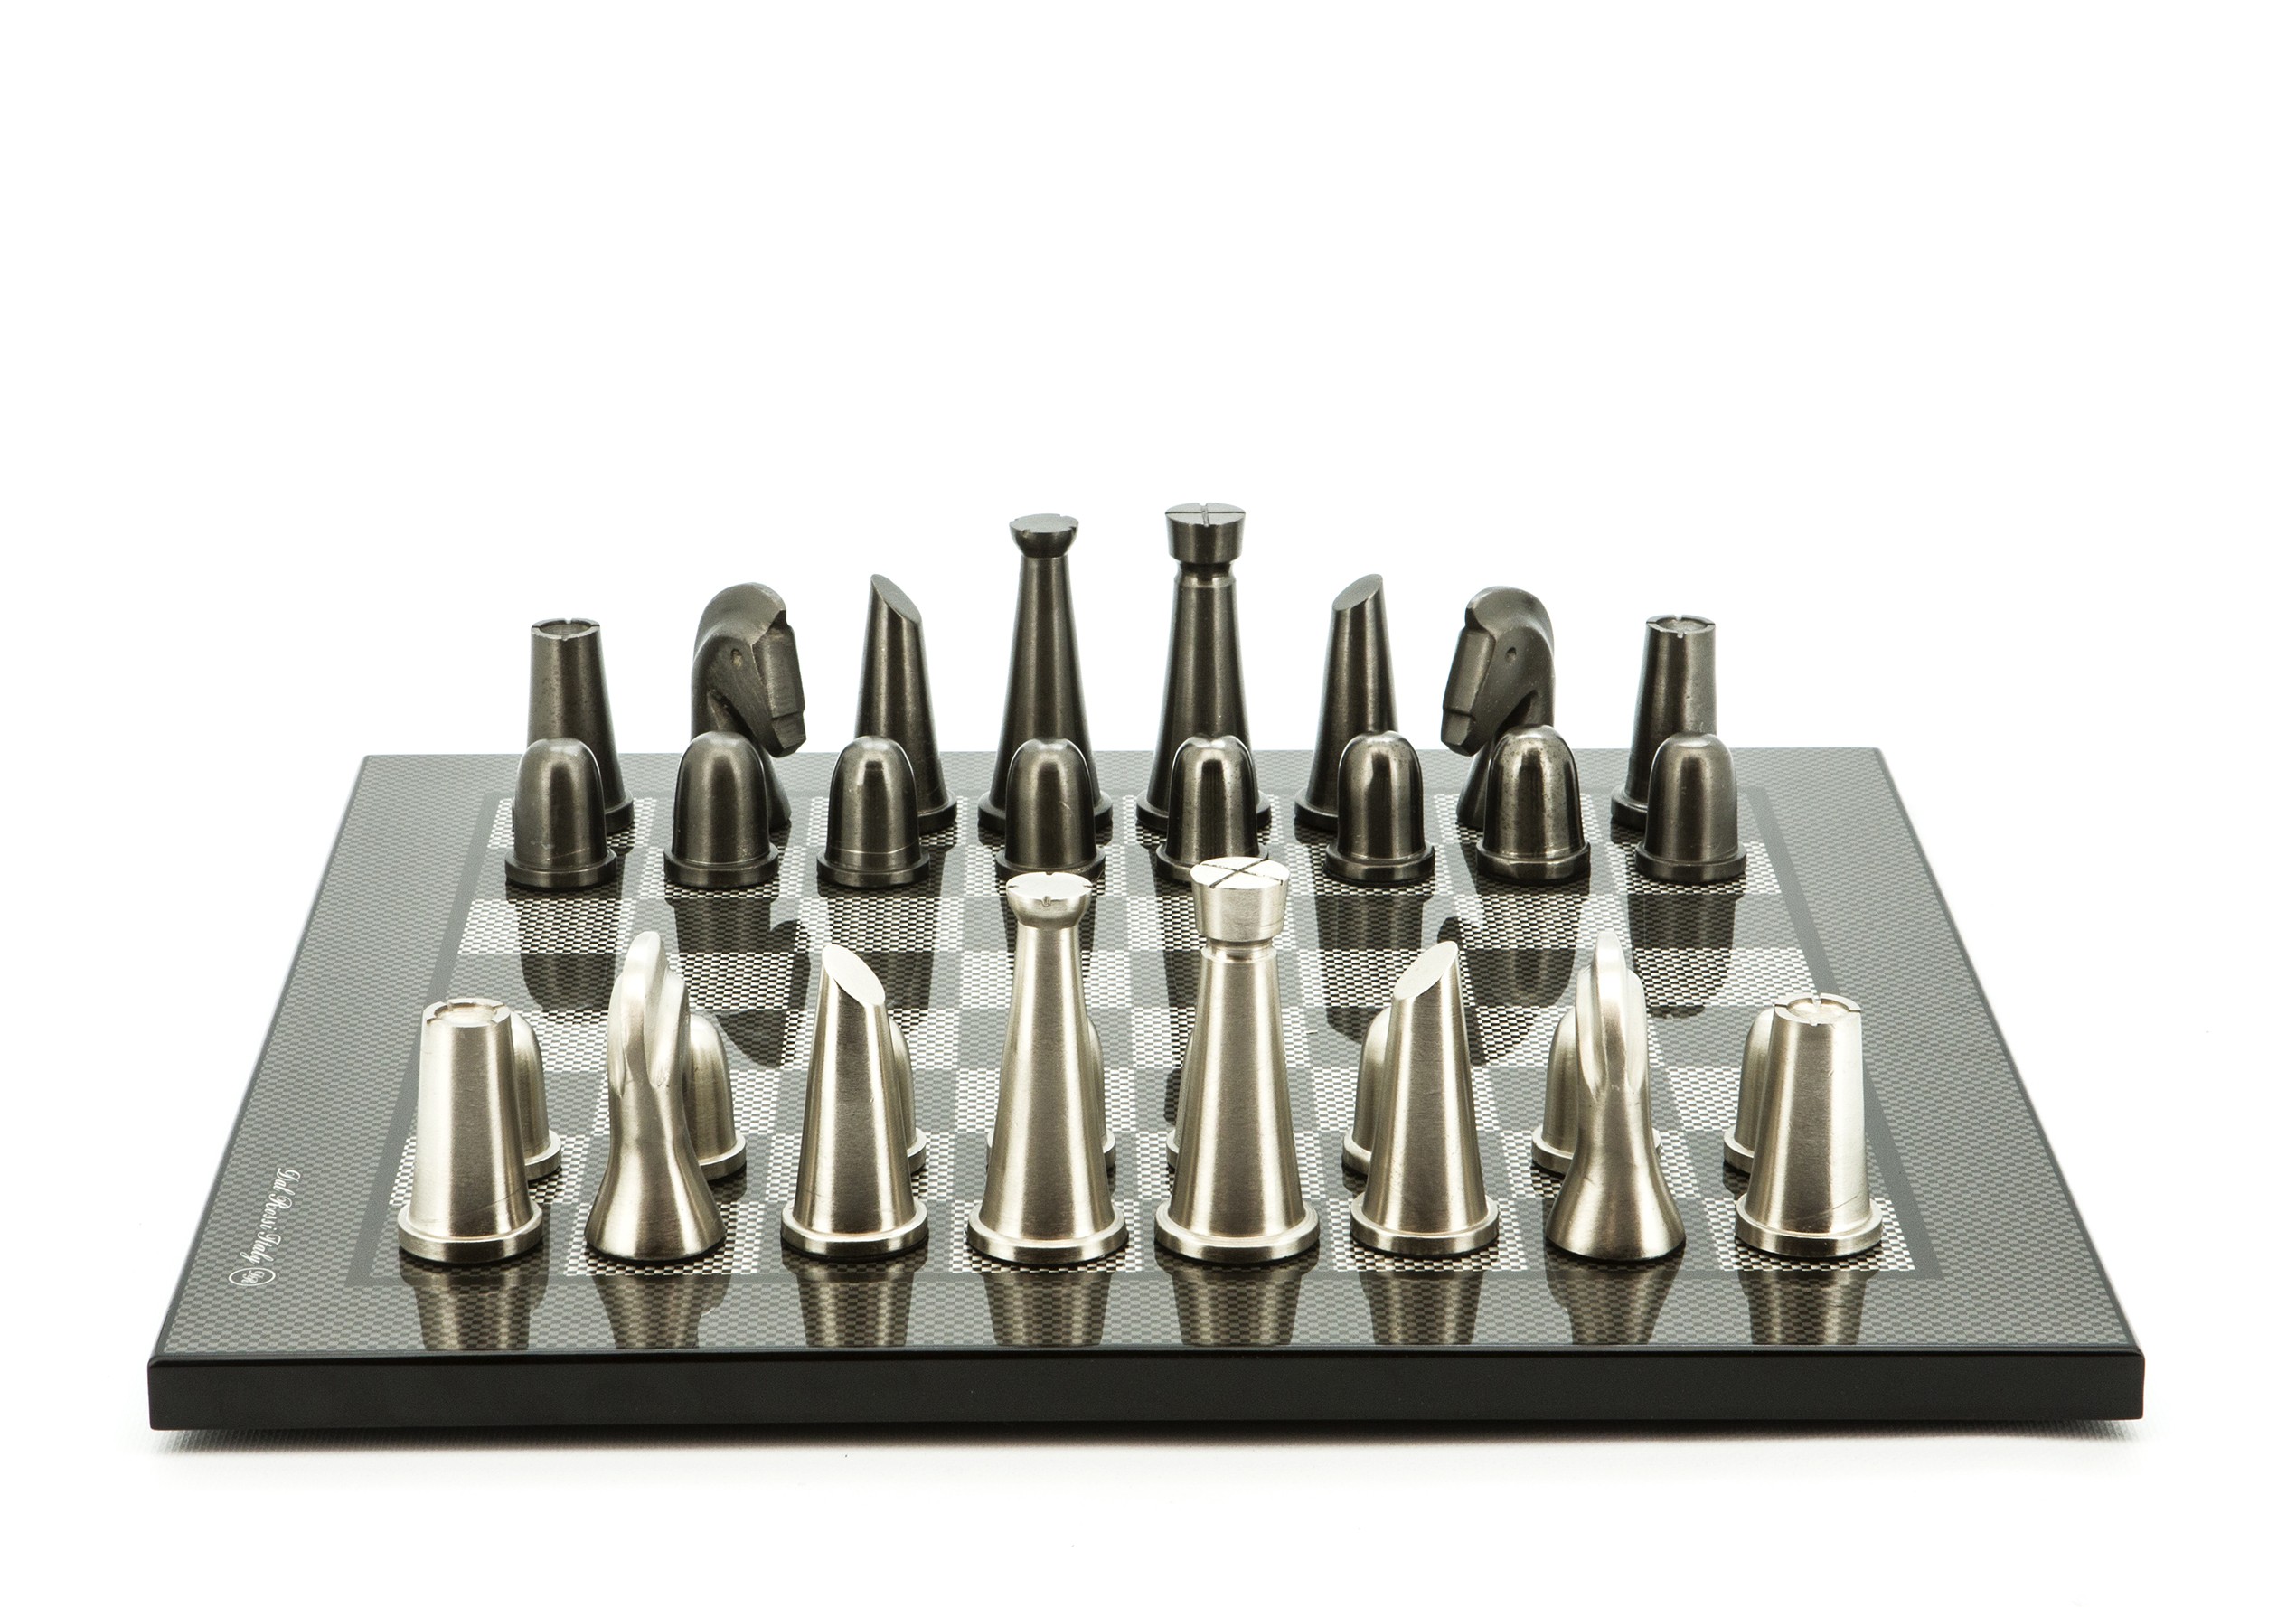 Dal Rossi Italy Chess Set Flat  Carbon Fibre Board 50cm, With Metal Dark Titanium and Silver chessmen 85mm